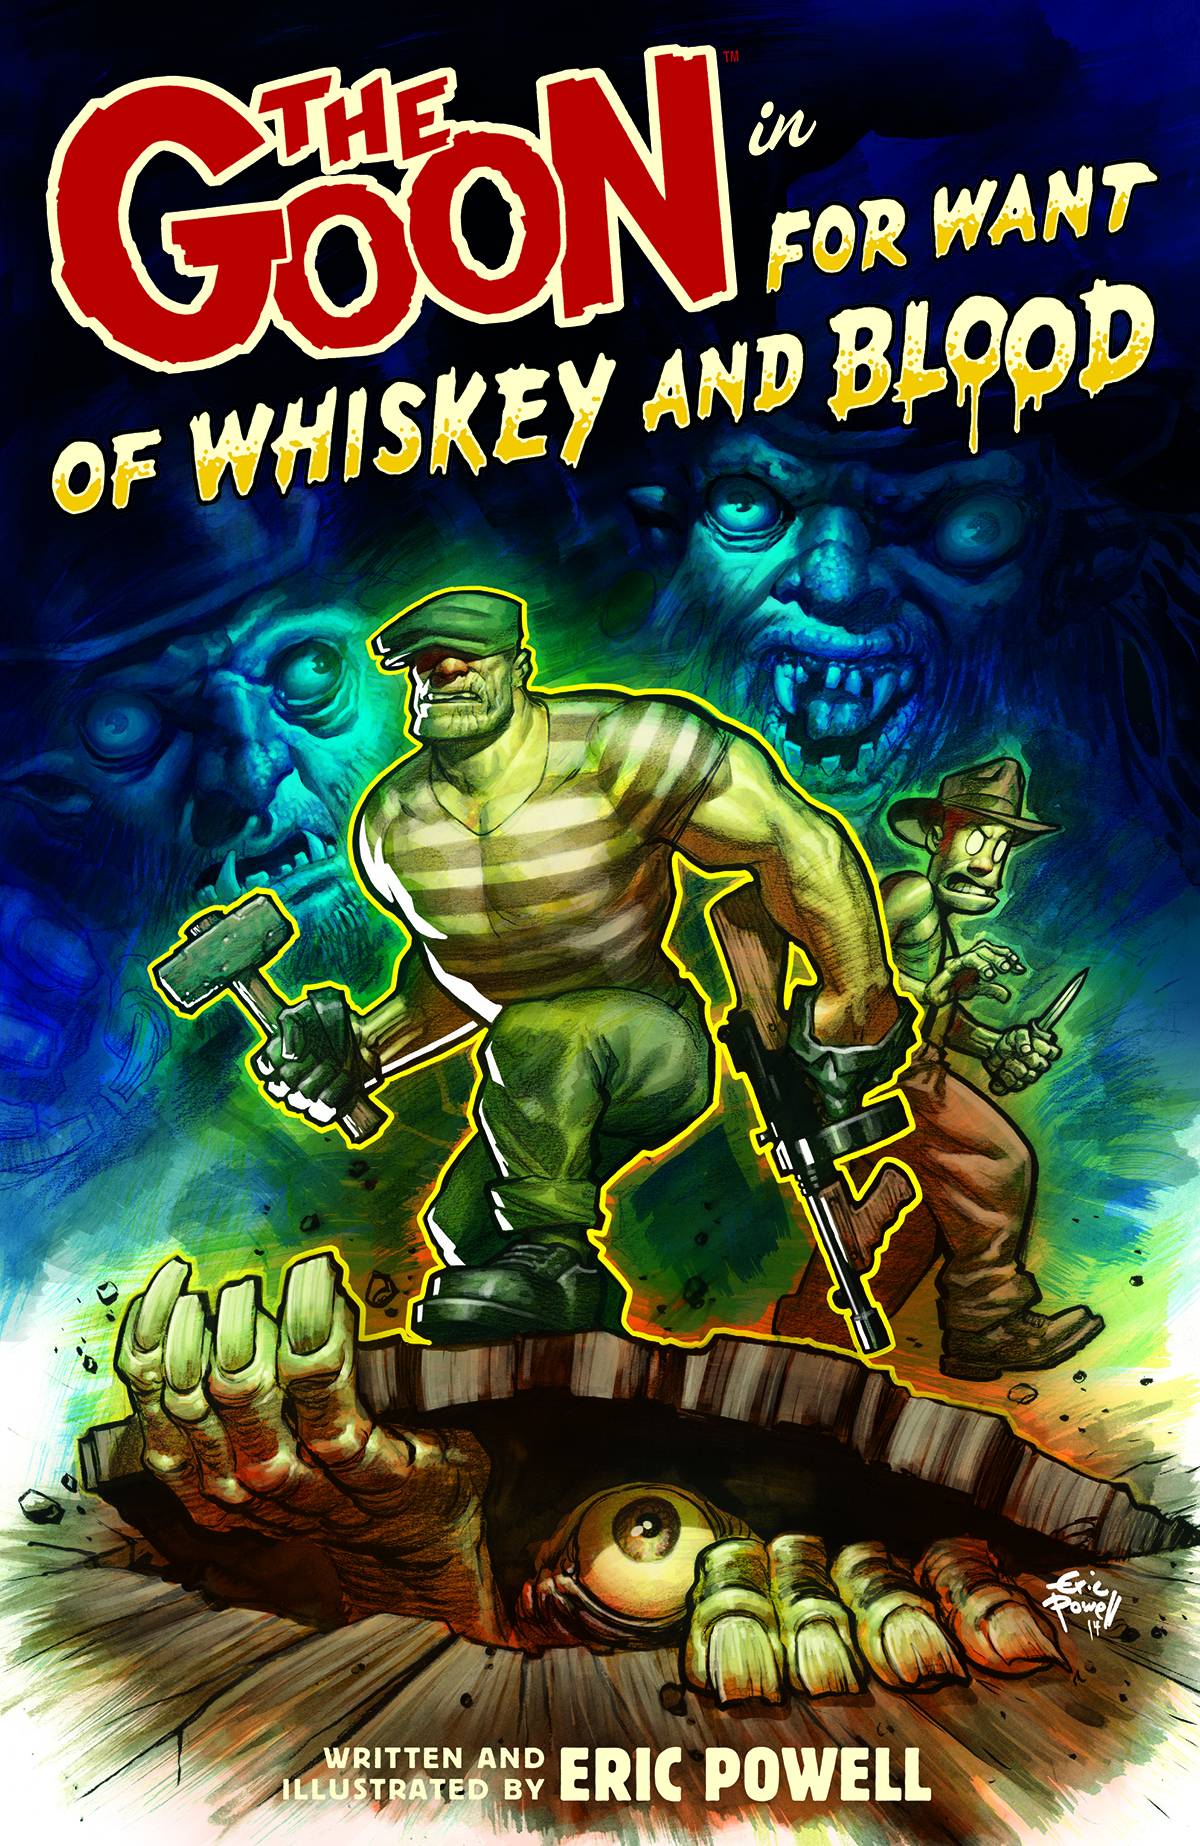 Goon Graphic Novel Volume 13 for Want of Whiskey And Blood